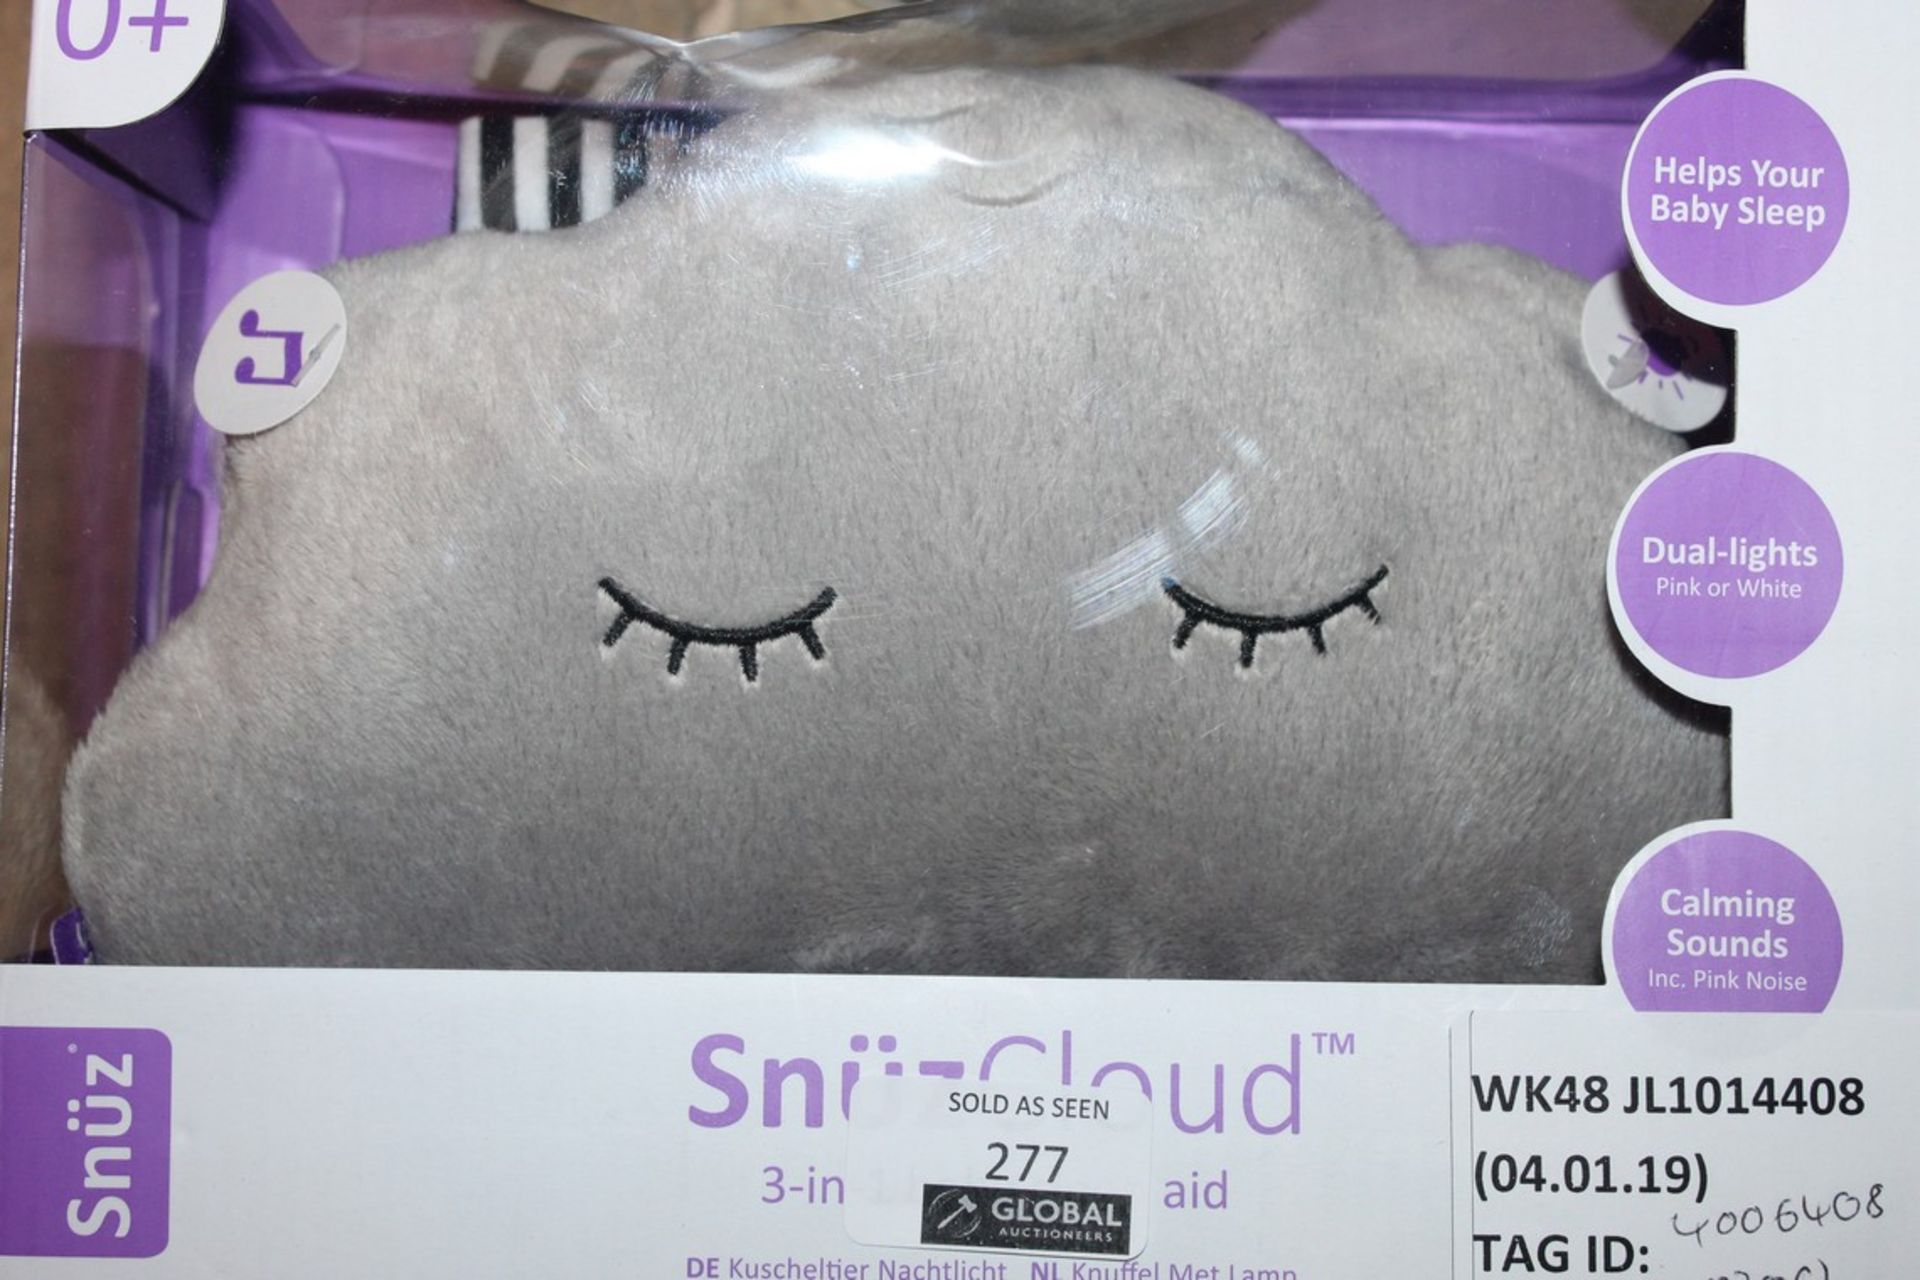 Lot to Contain 2 Boxed Snuz Cloud 3in1 Sleeping Aids Combined RRP £60 (4006408)(4005053) (Public